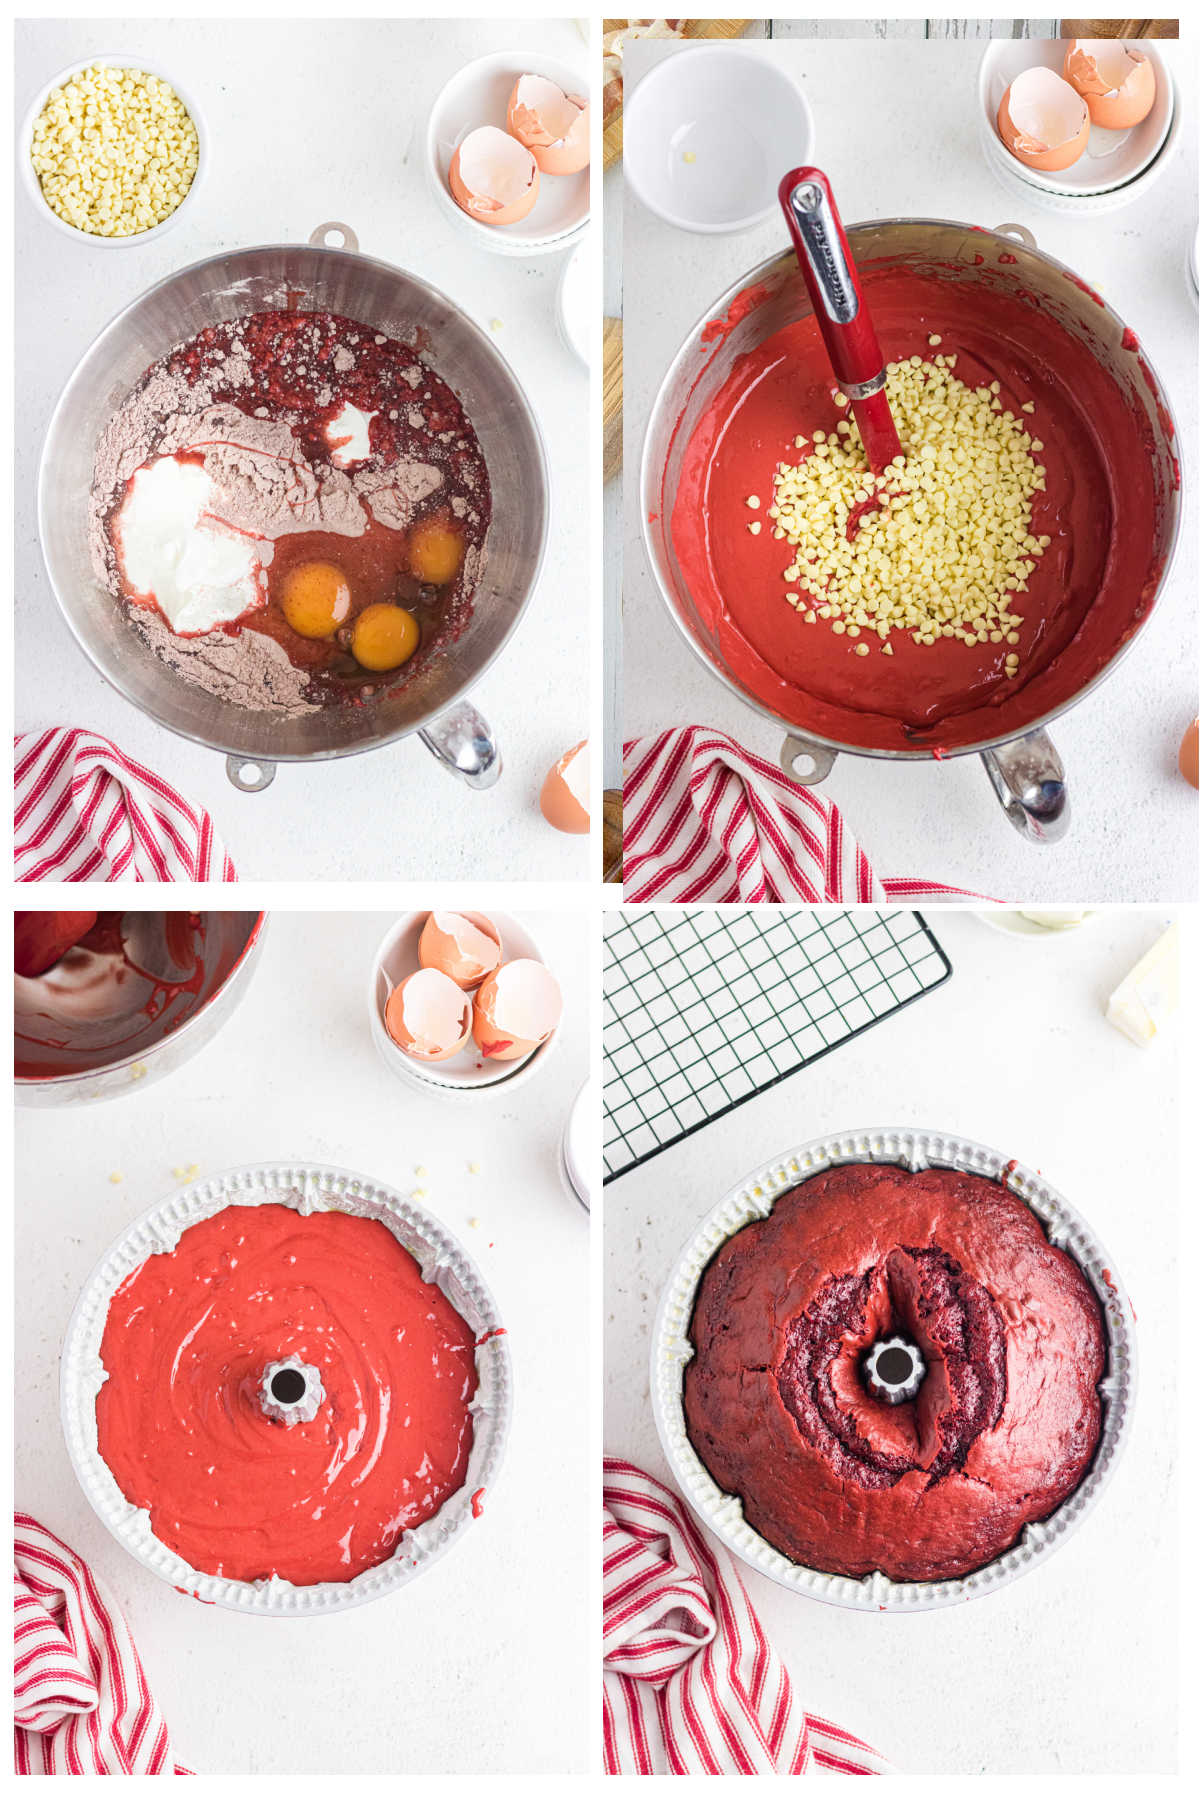 Step by step images showing how to make this cake.